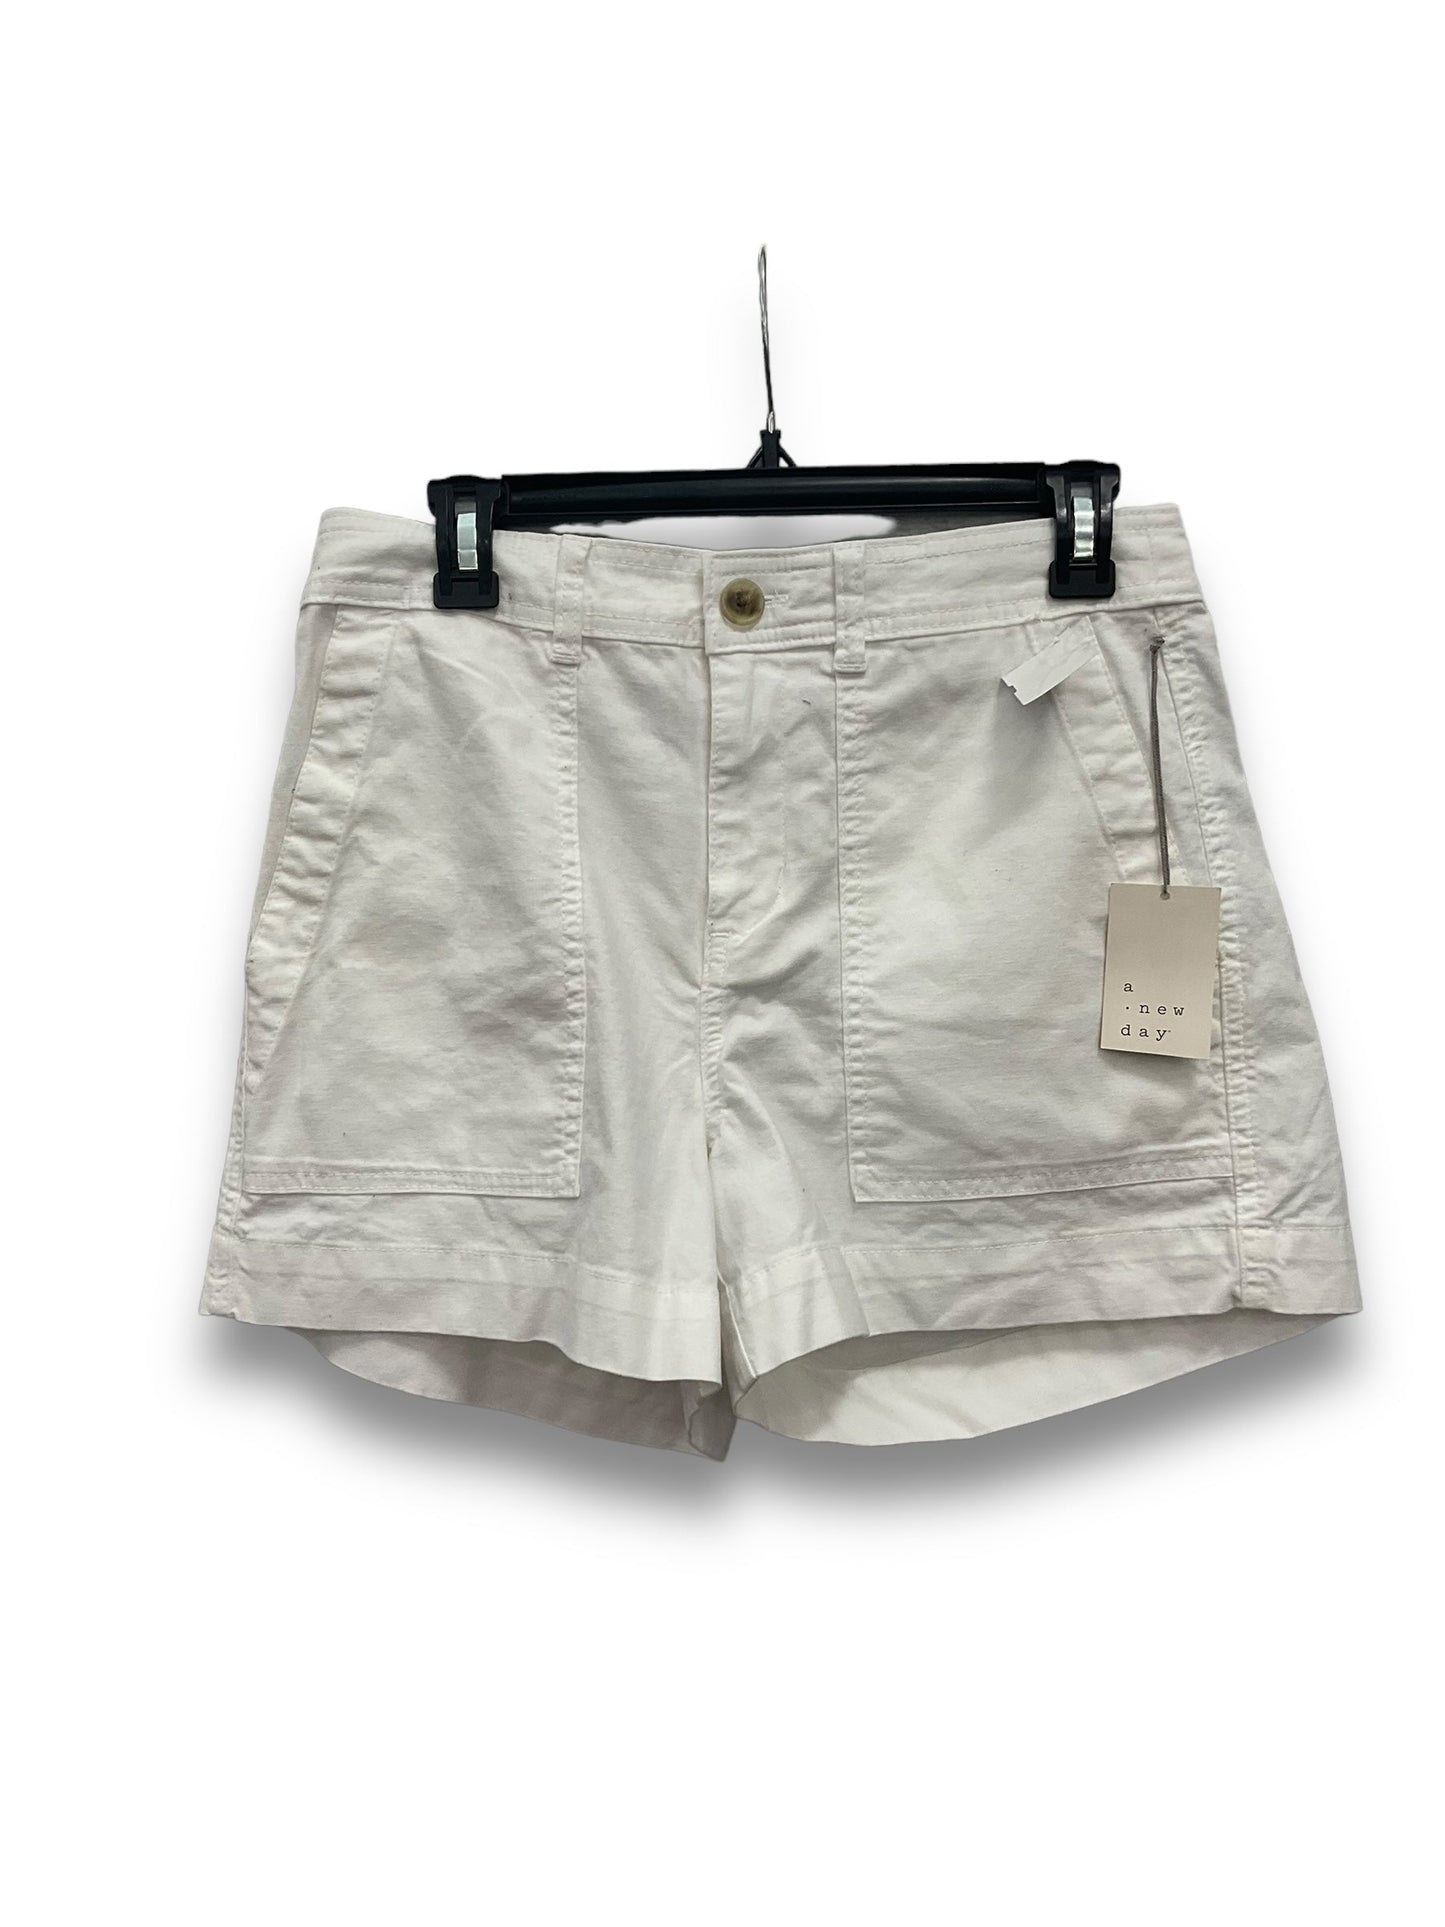 White Shorts A New Day, Size 8